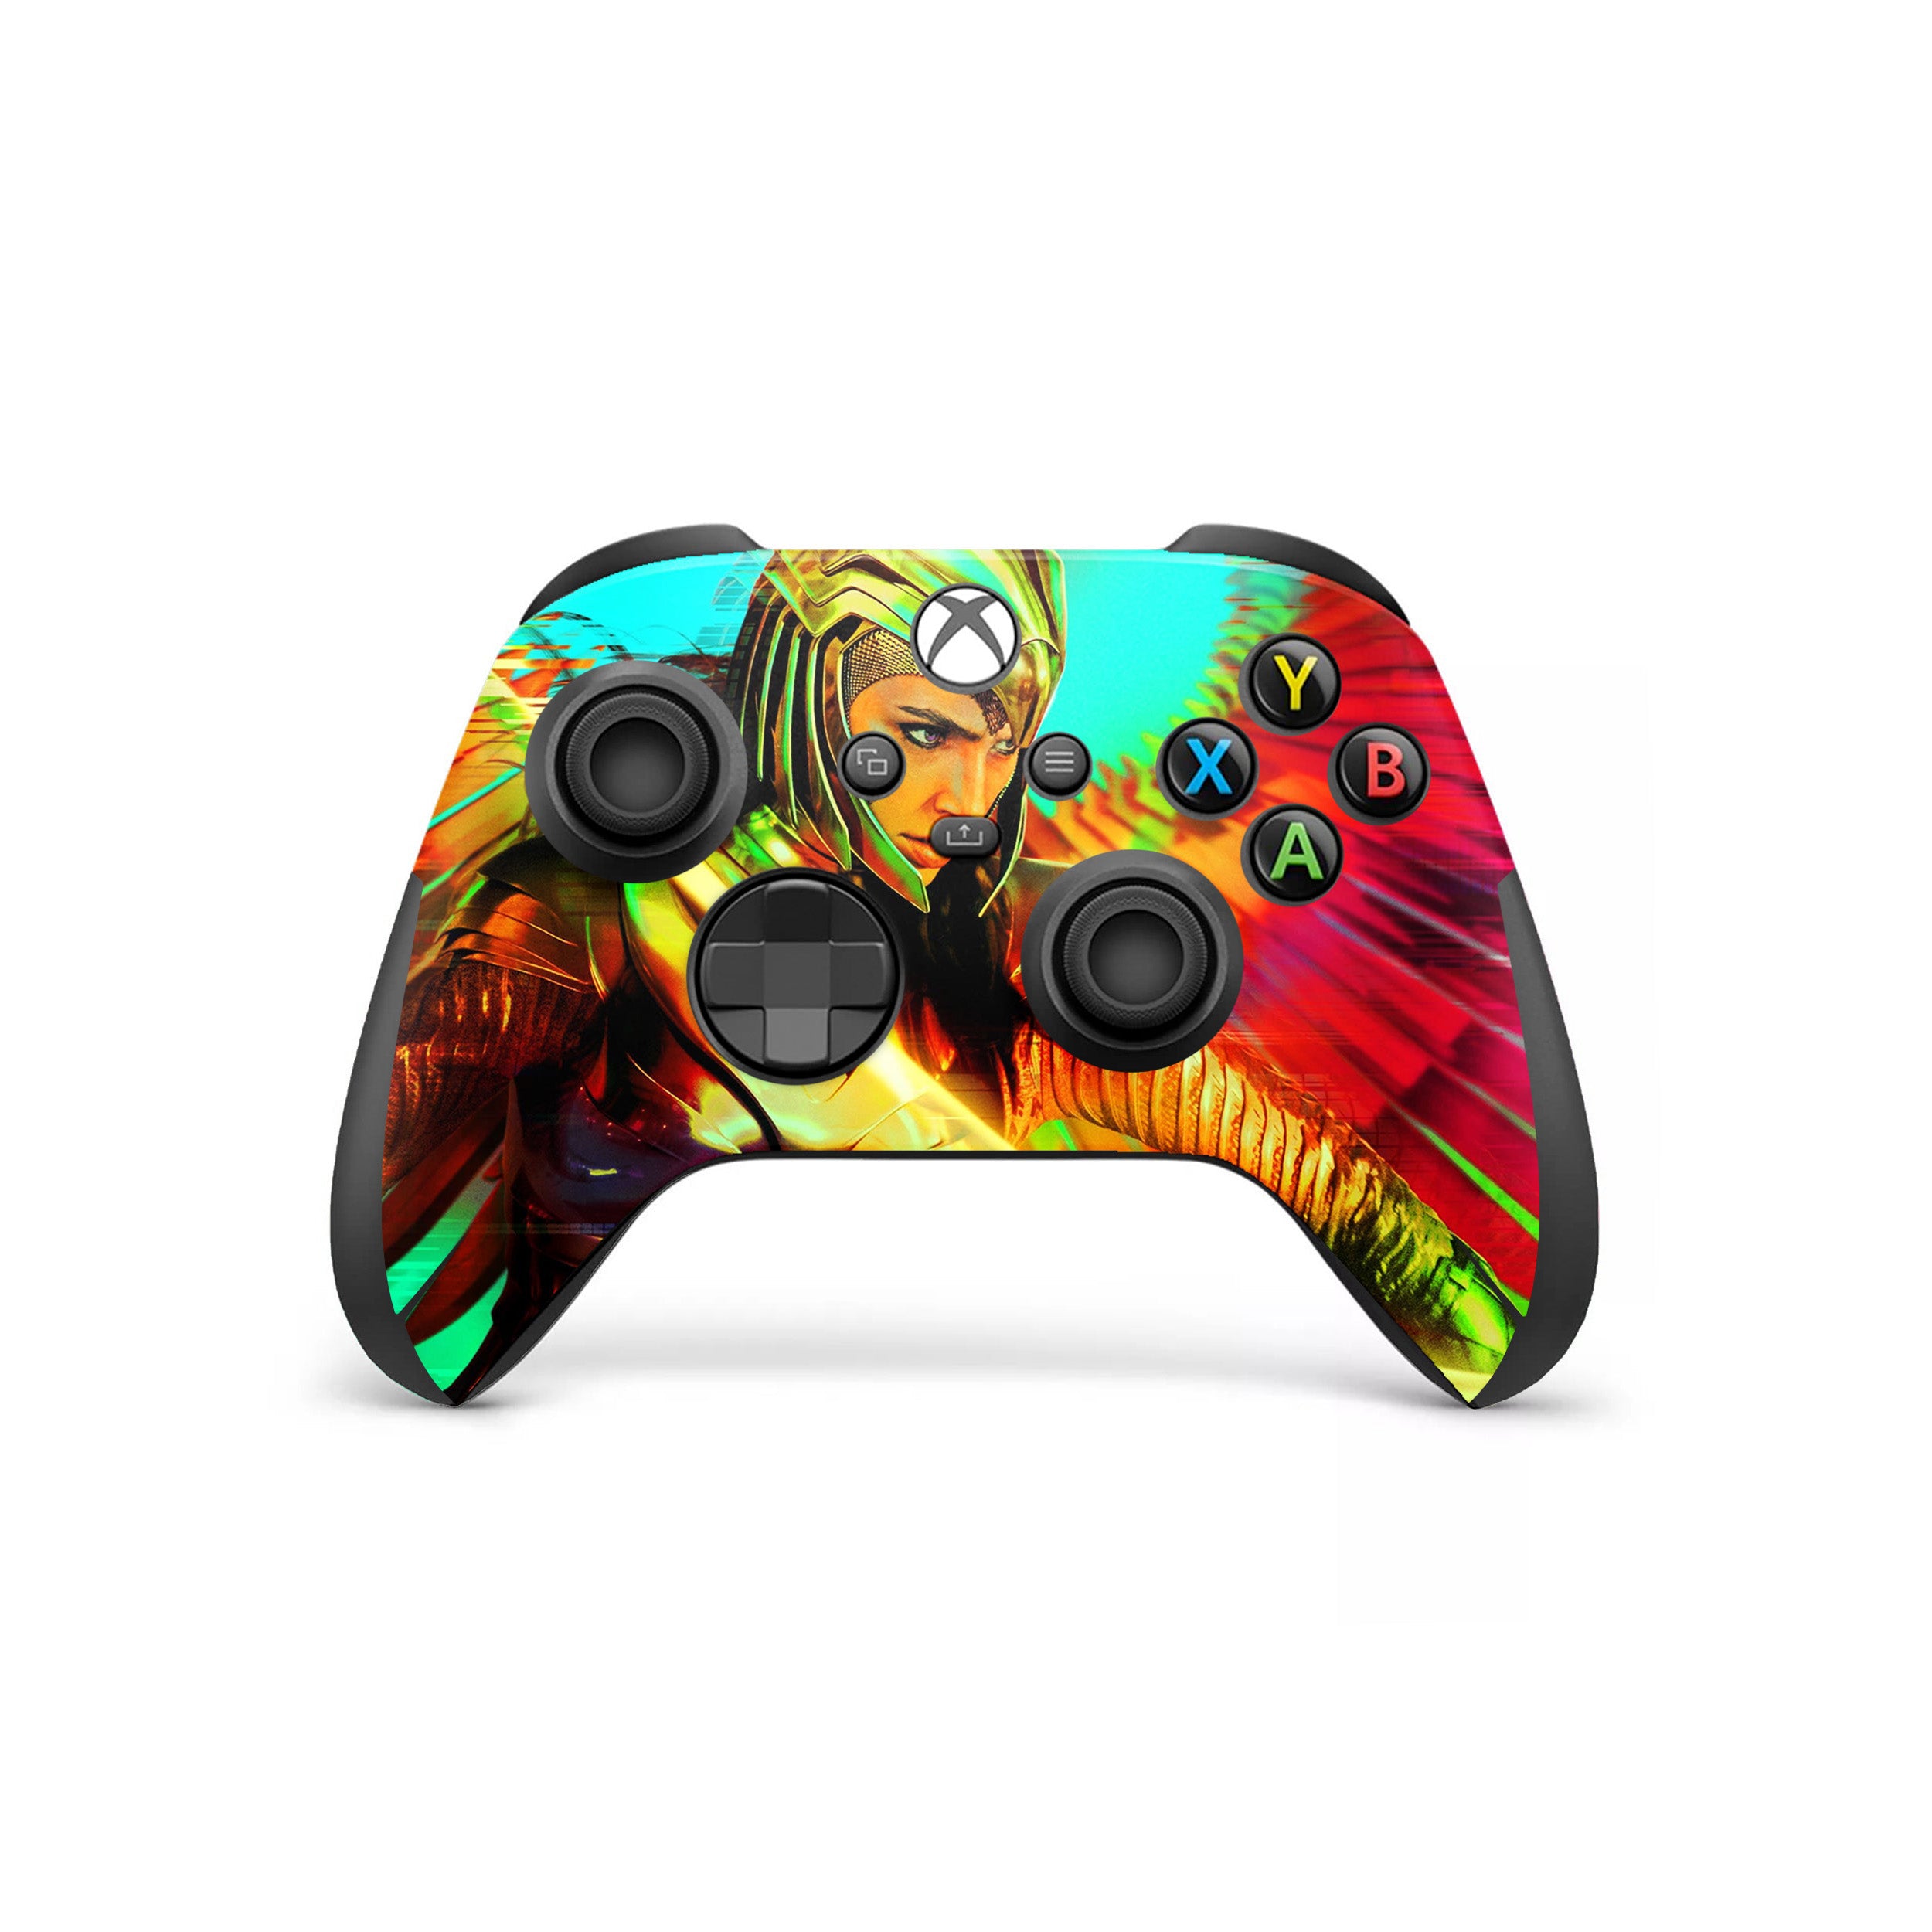 A video game skin featuring a DC Comics Wonder Woman design for the Xbox Wireless Controller.